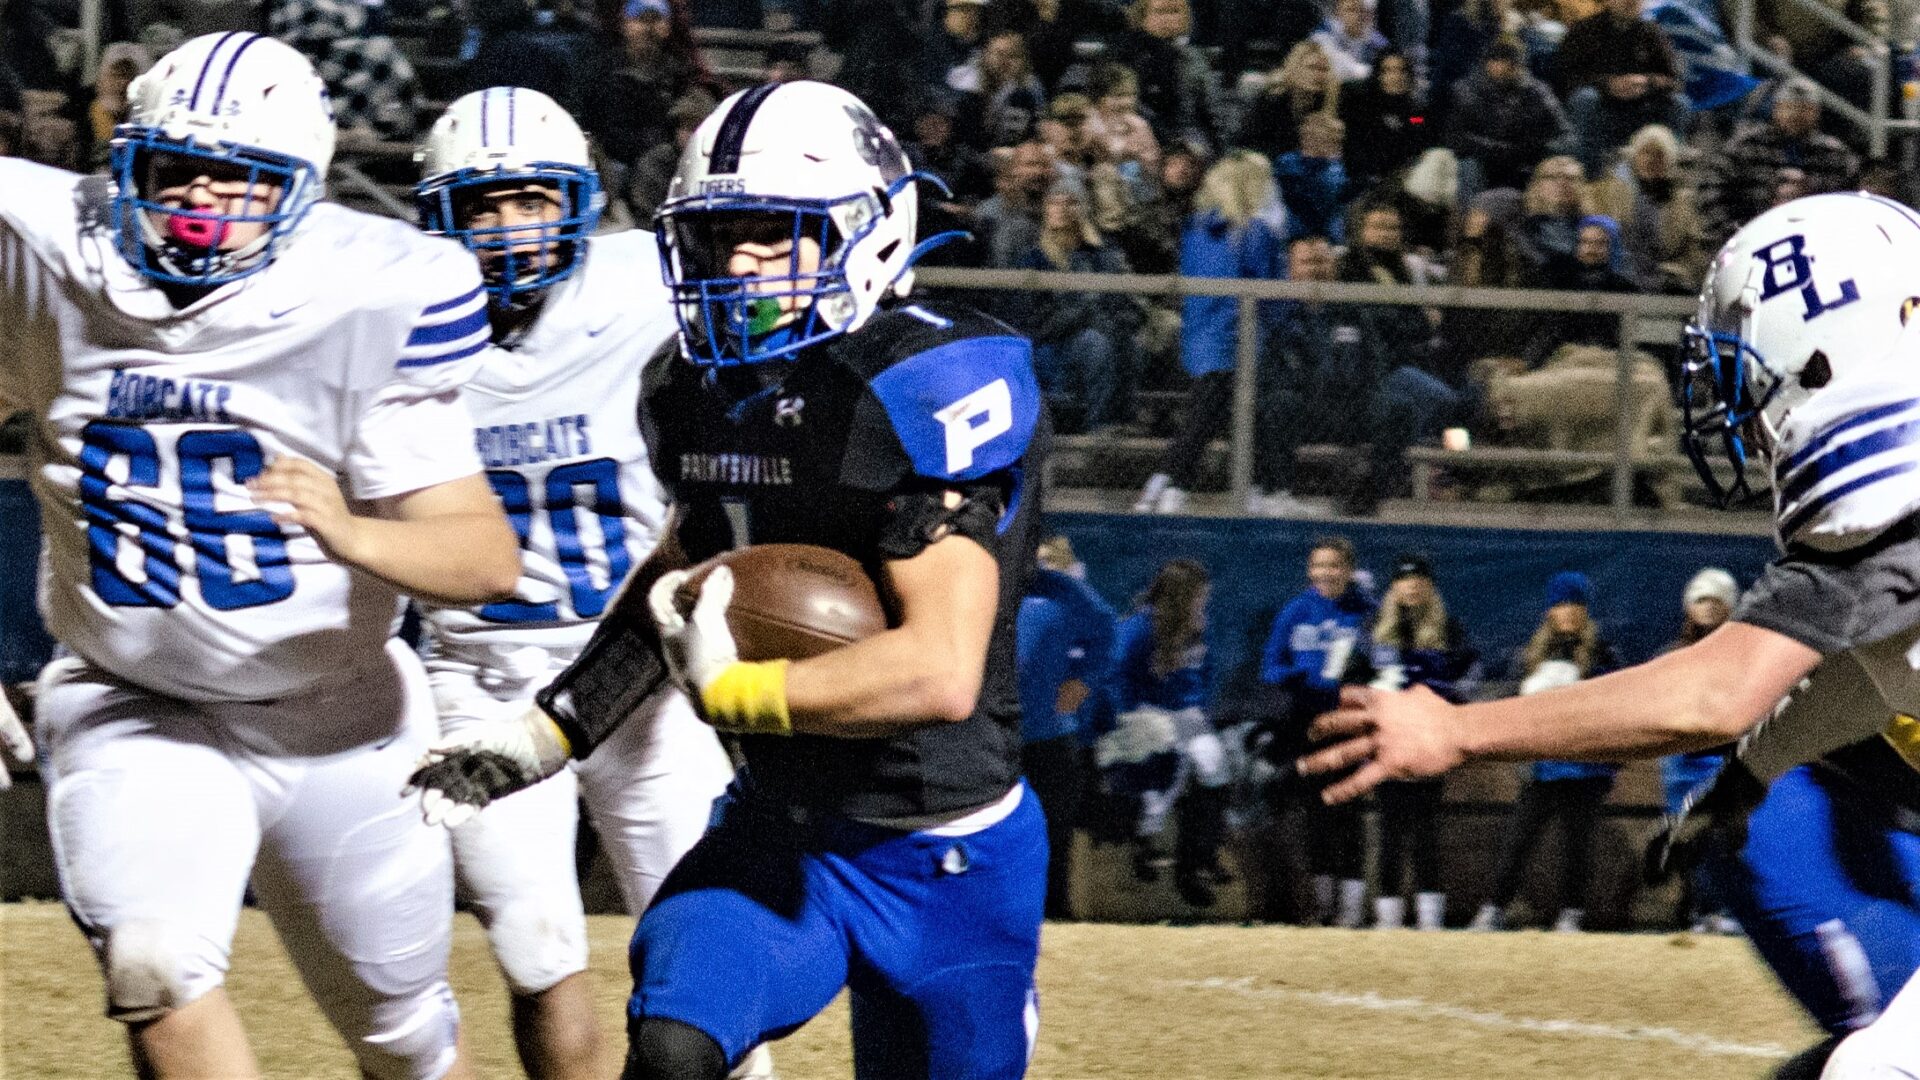 HIGH SCHOOL FOOTBALL: Paintsville reaches district title game with win over BL